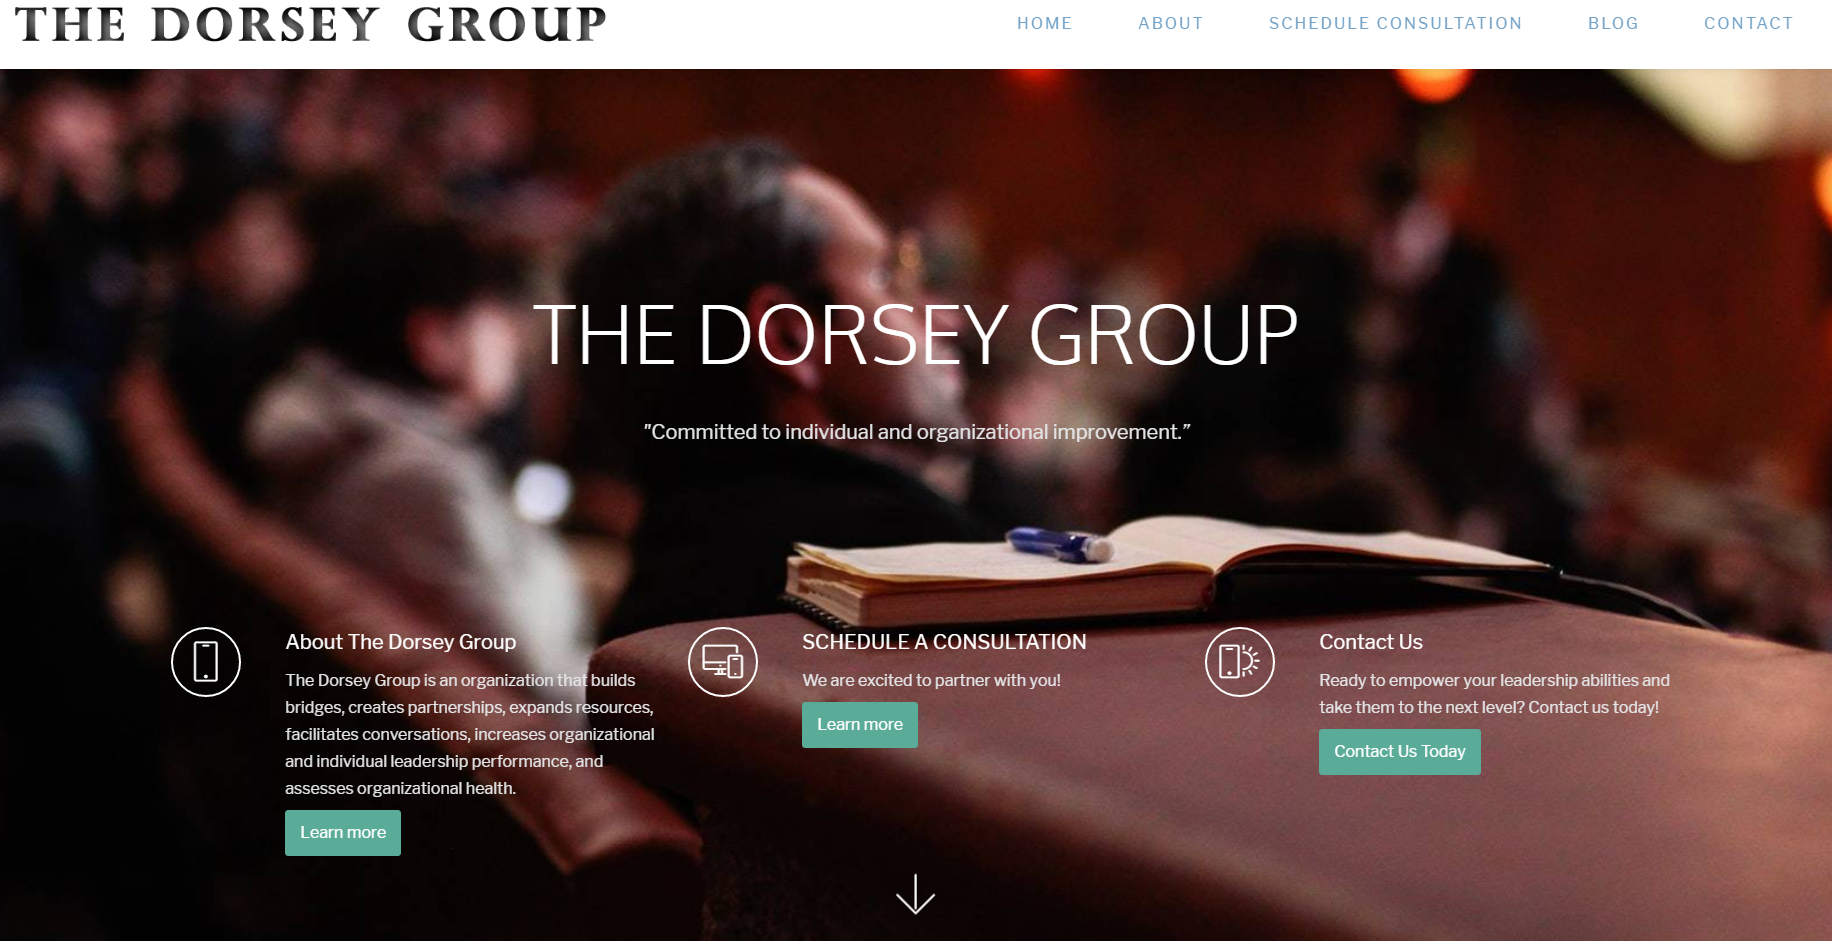 The Dorsey Group